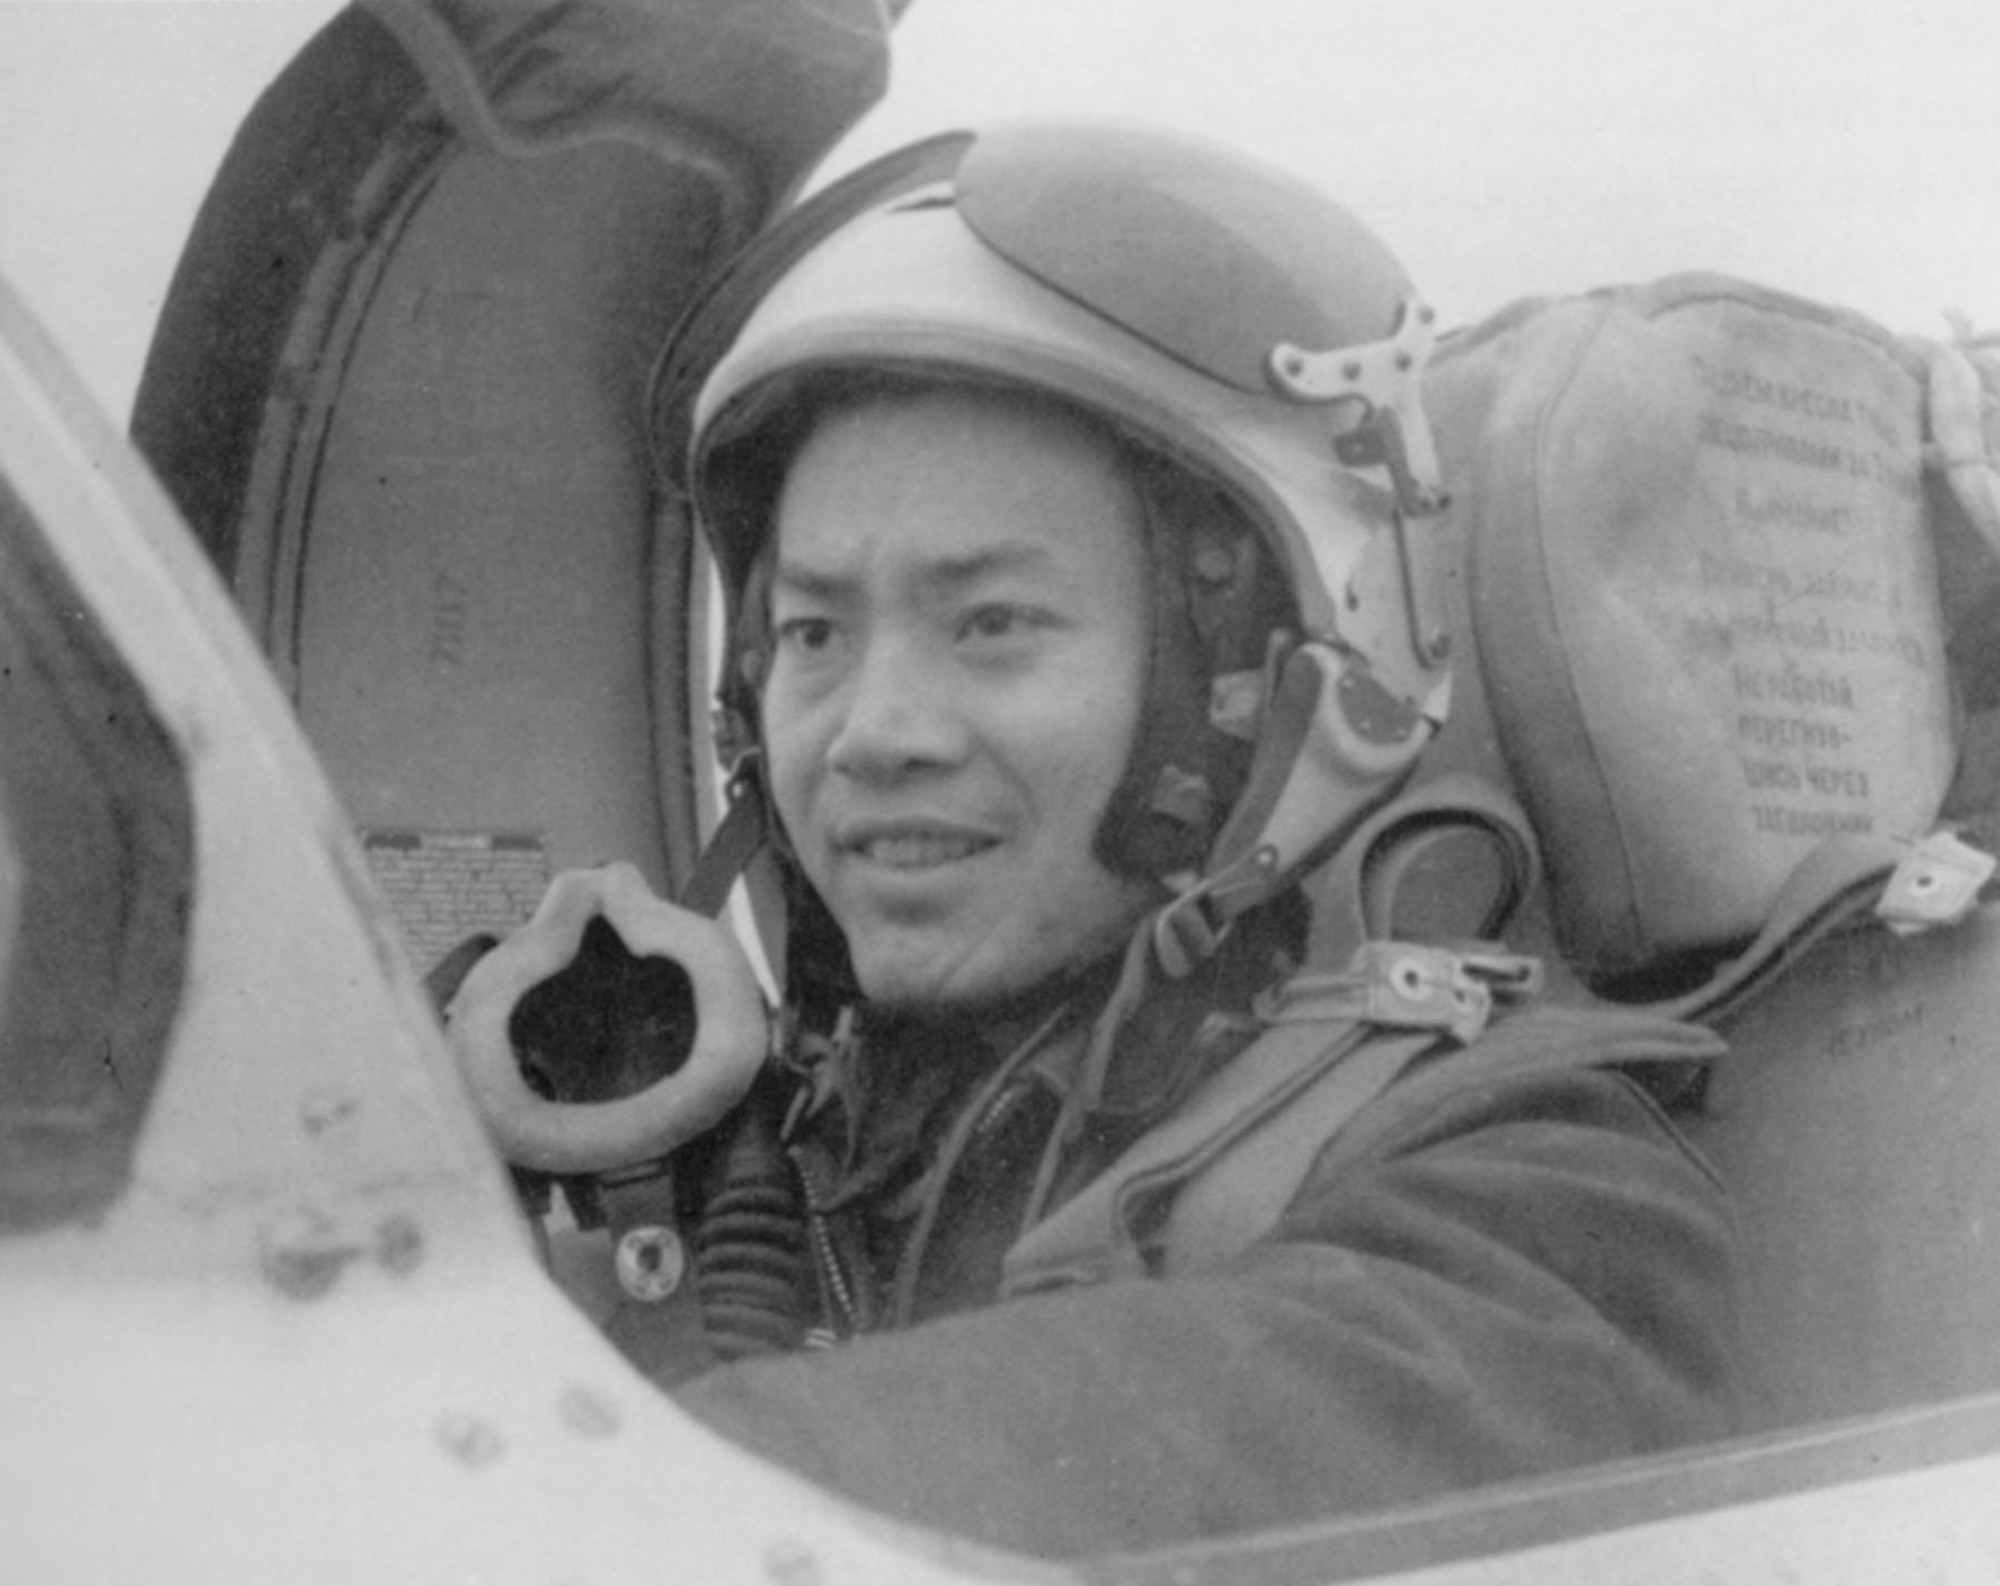 This Soviet-made helmet was the type used by most North Vietnamese MiG-21 pilots during the Southeast Asia War. (U.S. Air Force photo)